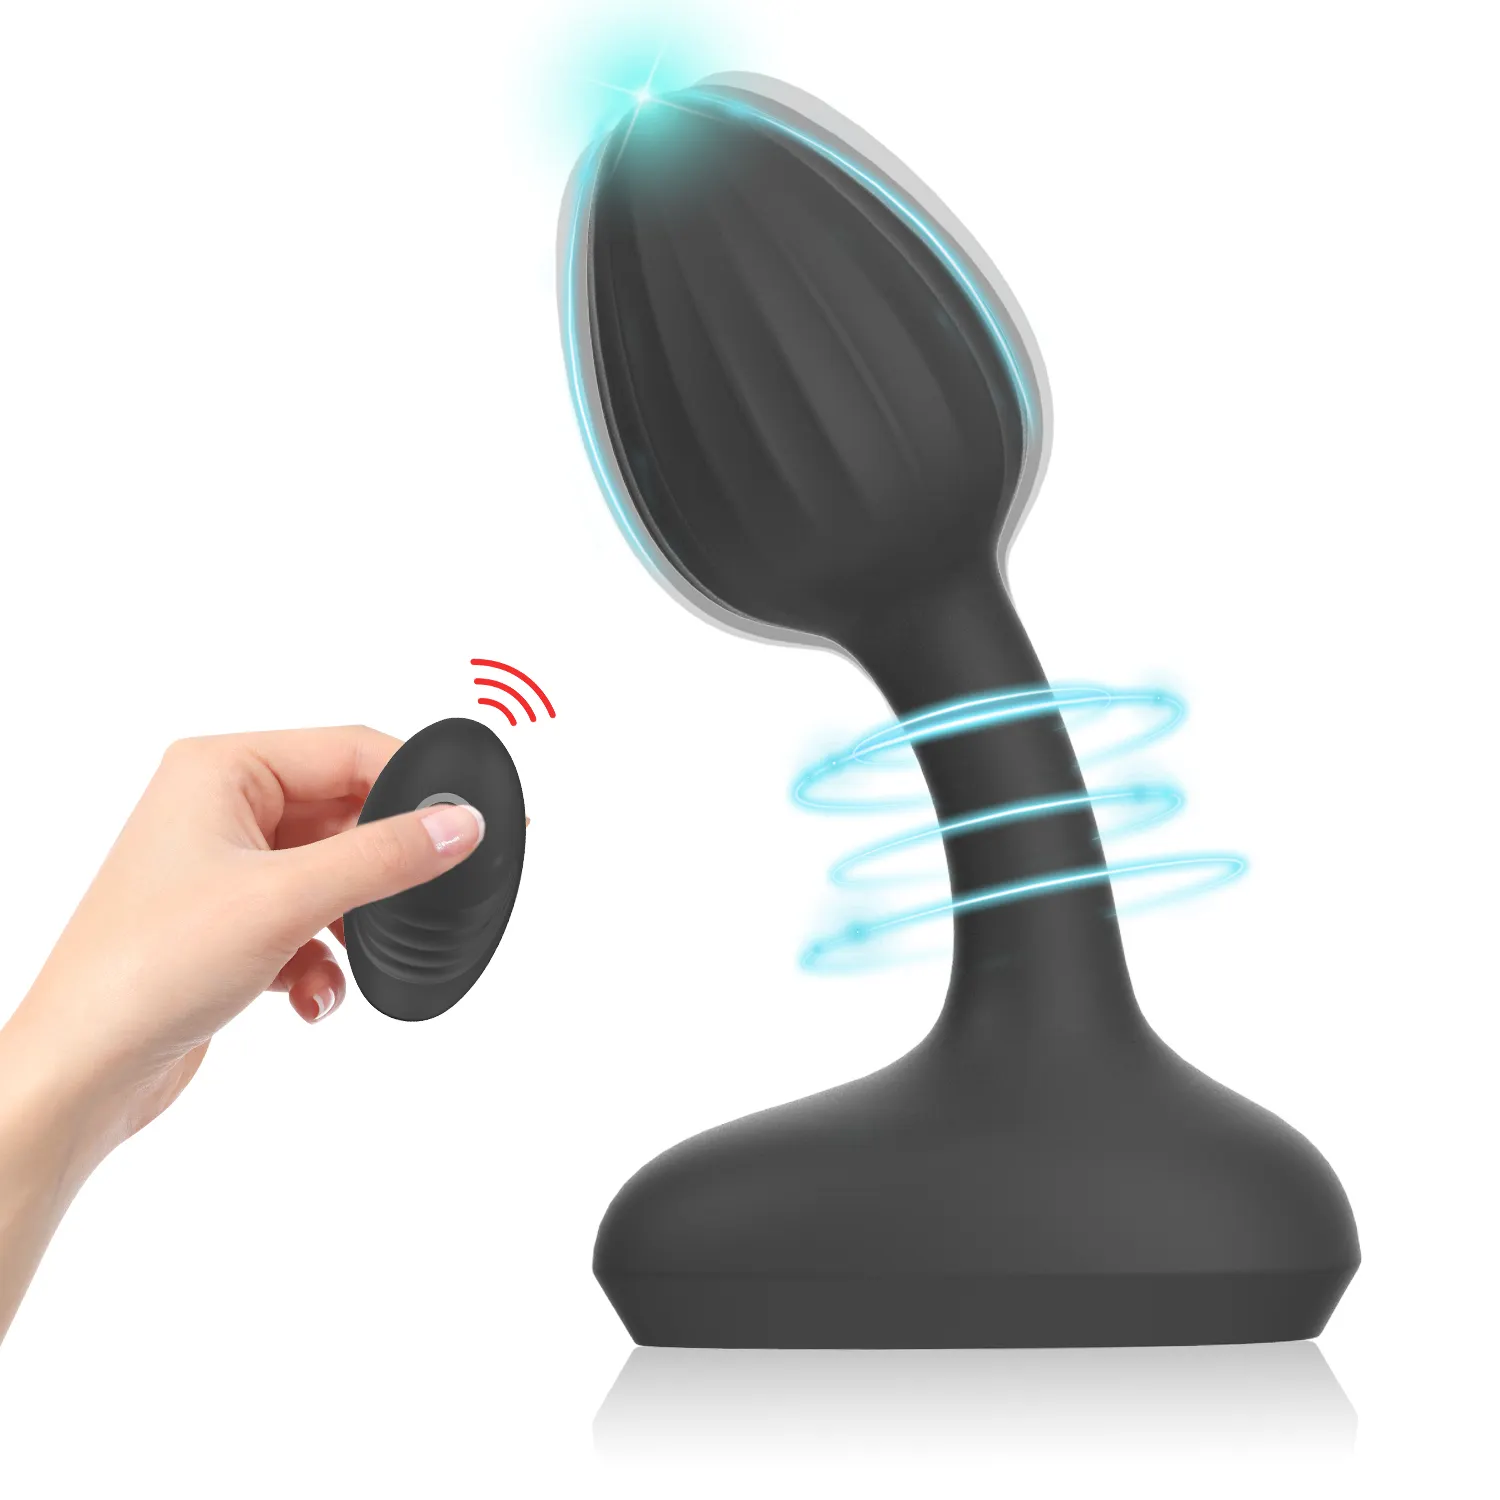 Ylove Sex Toy Anal Plug Vibrator Silicone10 Modes Remote Control Electric Prostate Massager